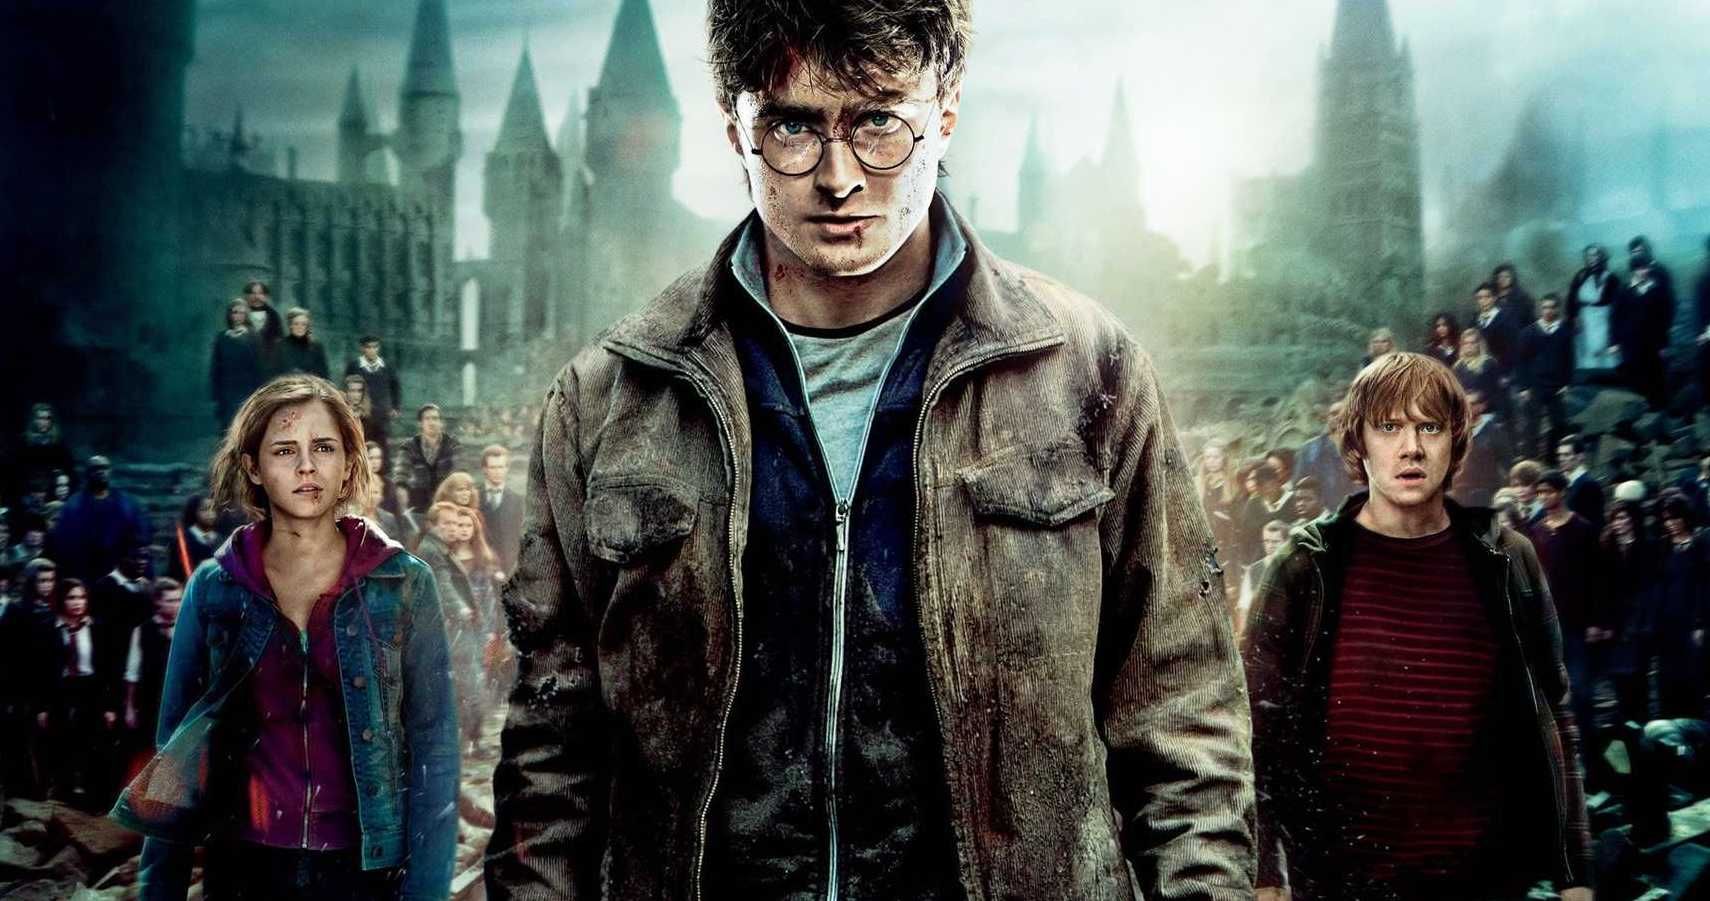 10 Ways Harry Potter Changed The World